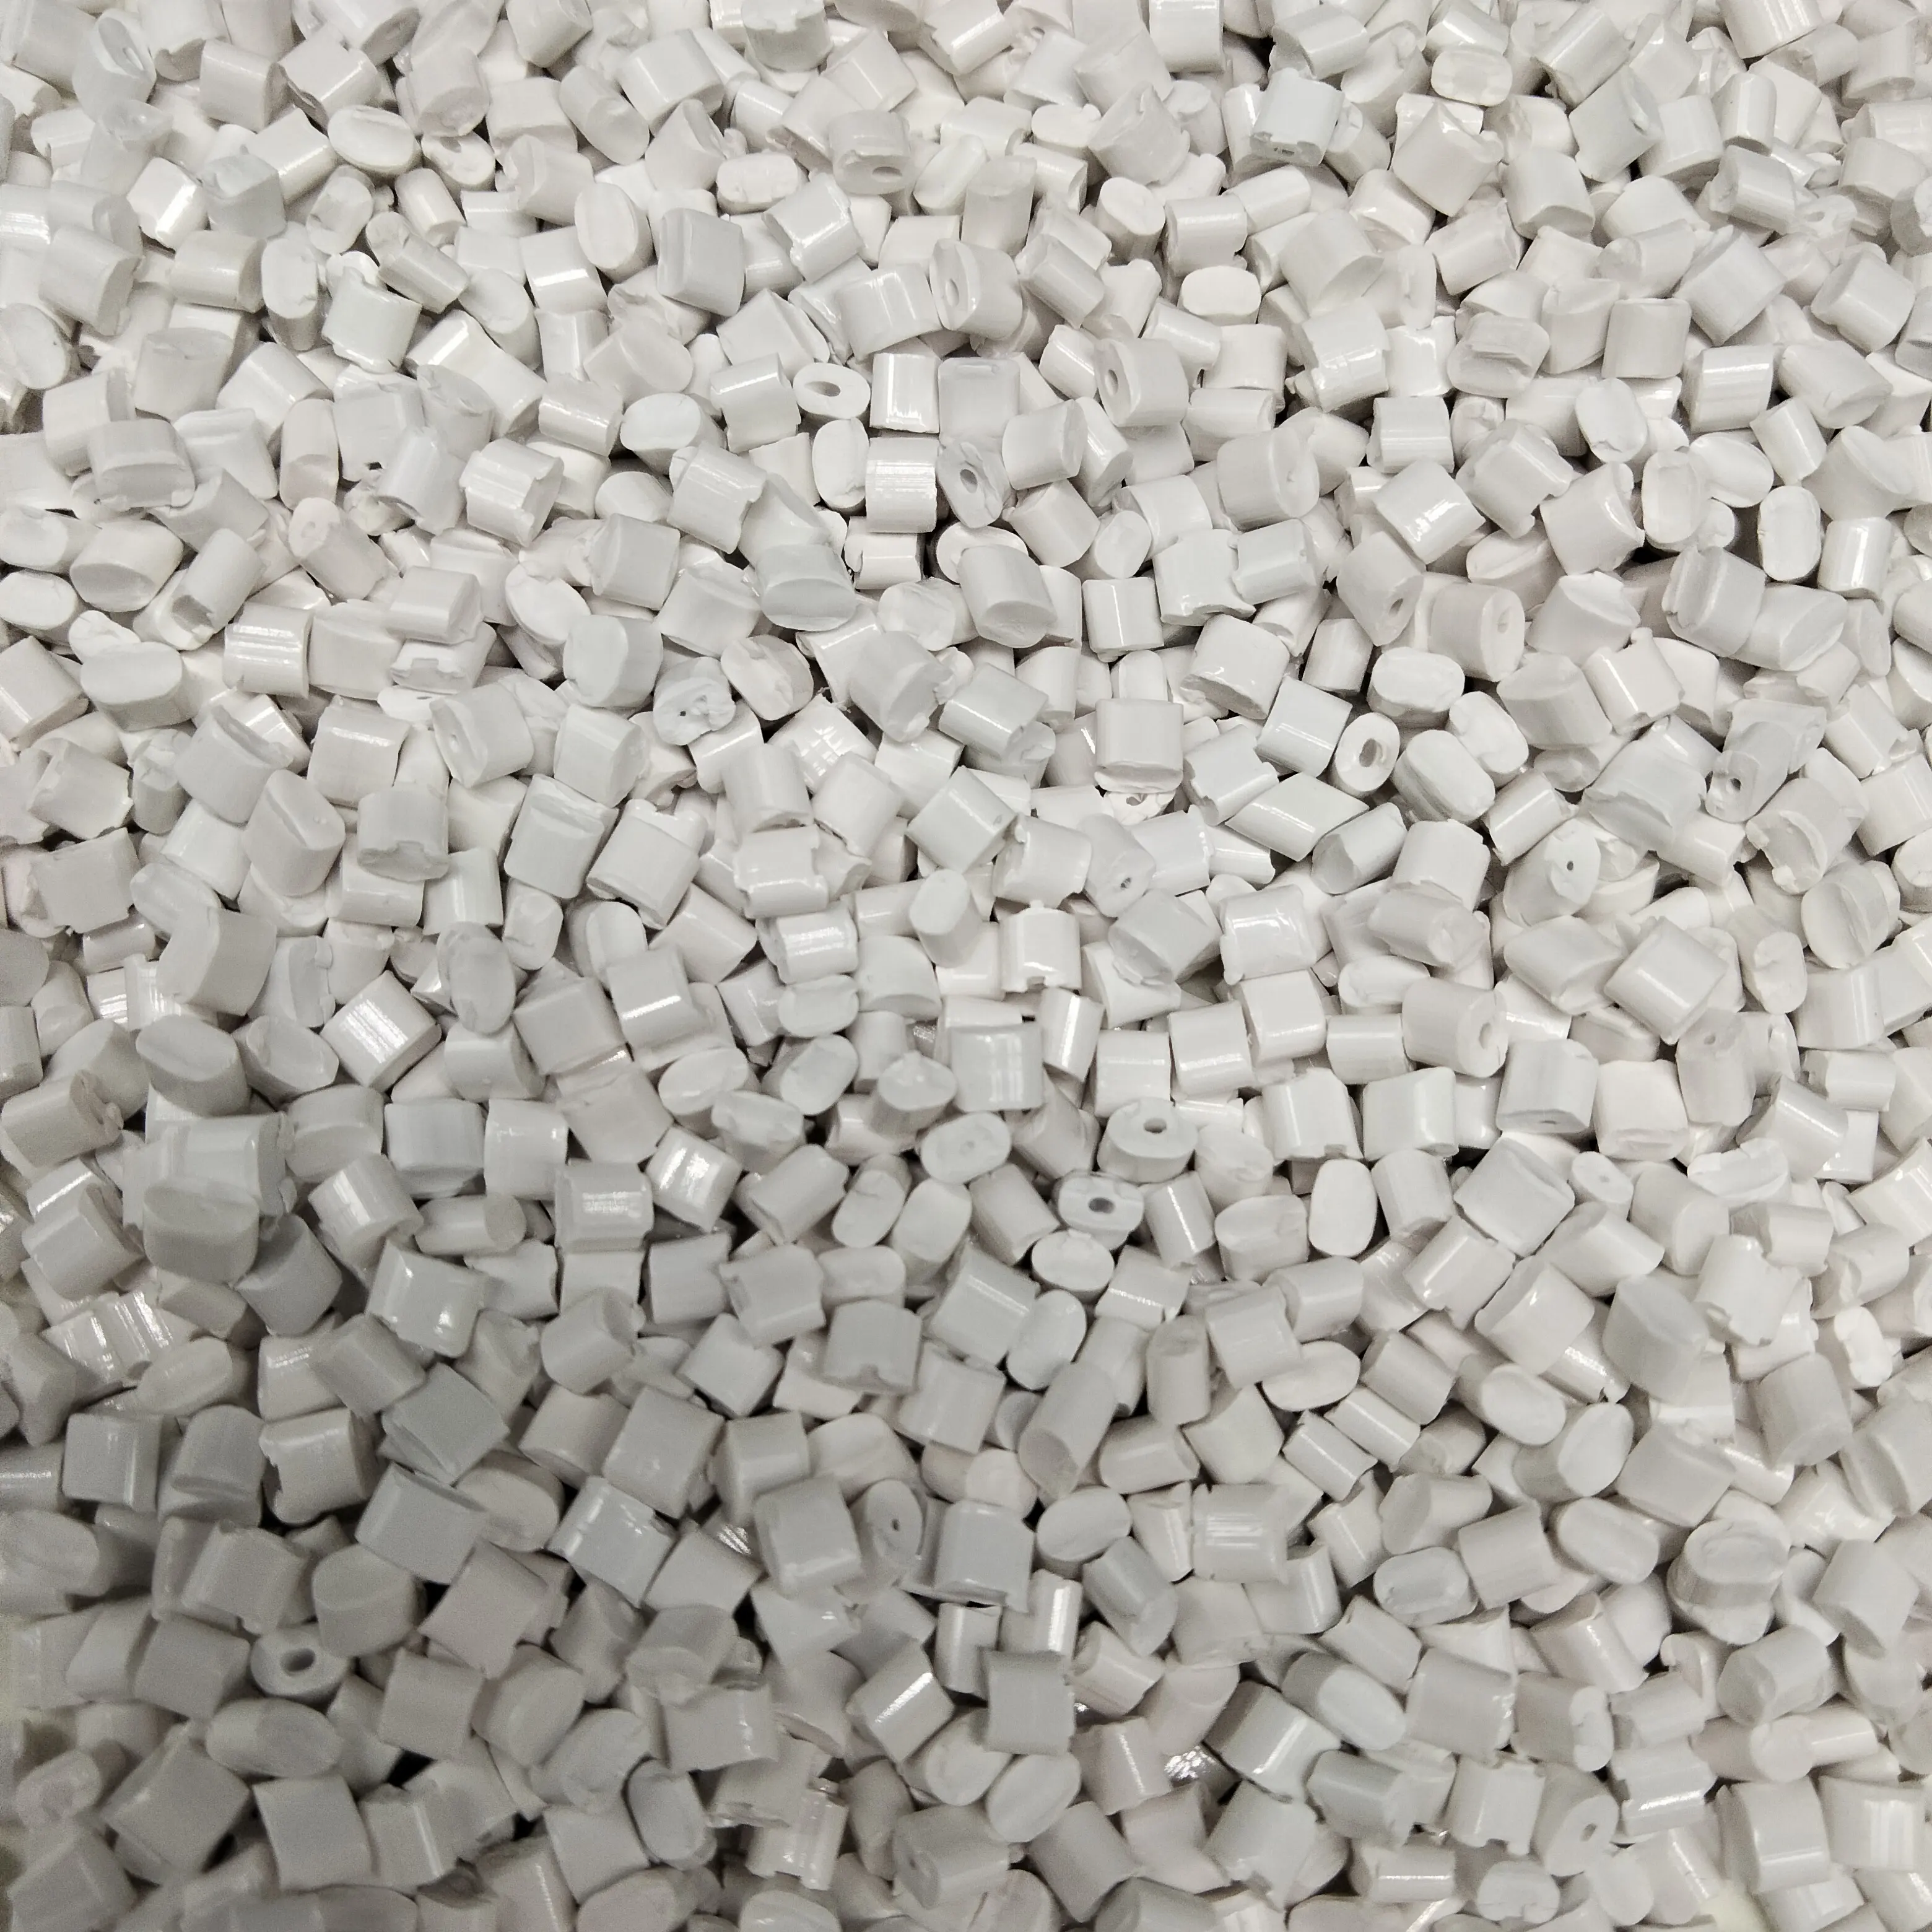 Wholesale ABS White MASTERBATCH Plastic Raw Material Granules Pellets